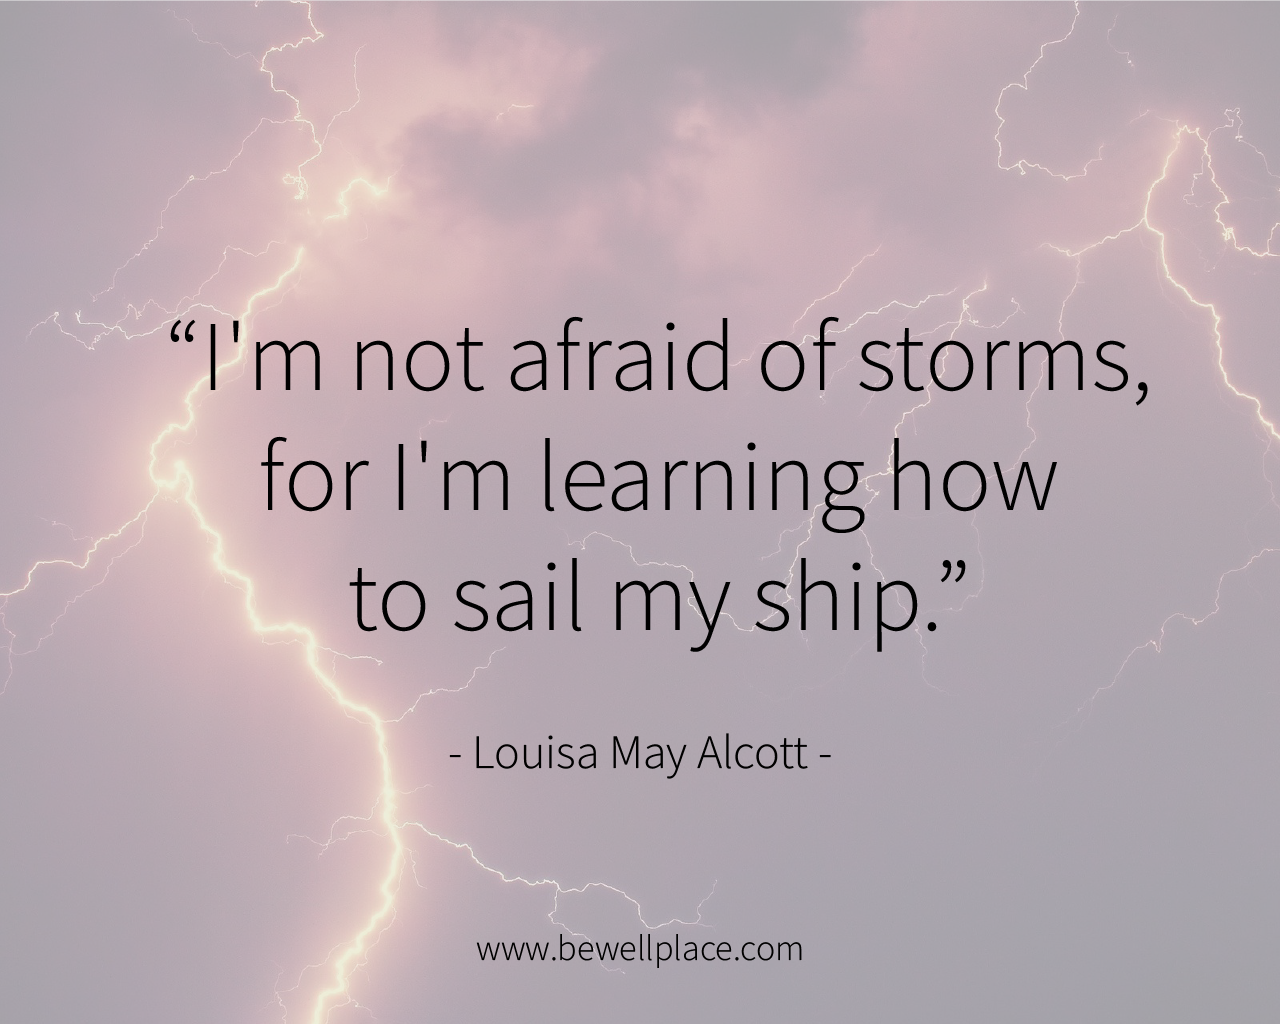 I'm not afraid of storms, for I'm learning how to sail my ship. - Louisa May Alcott